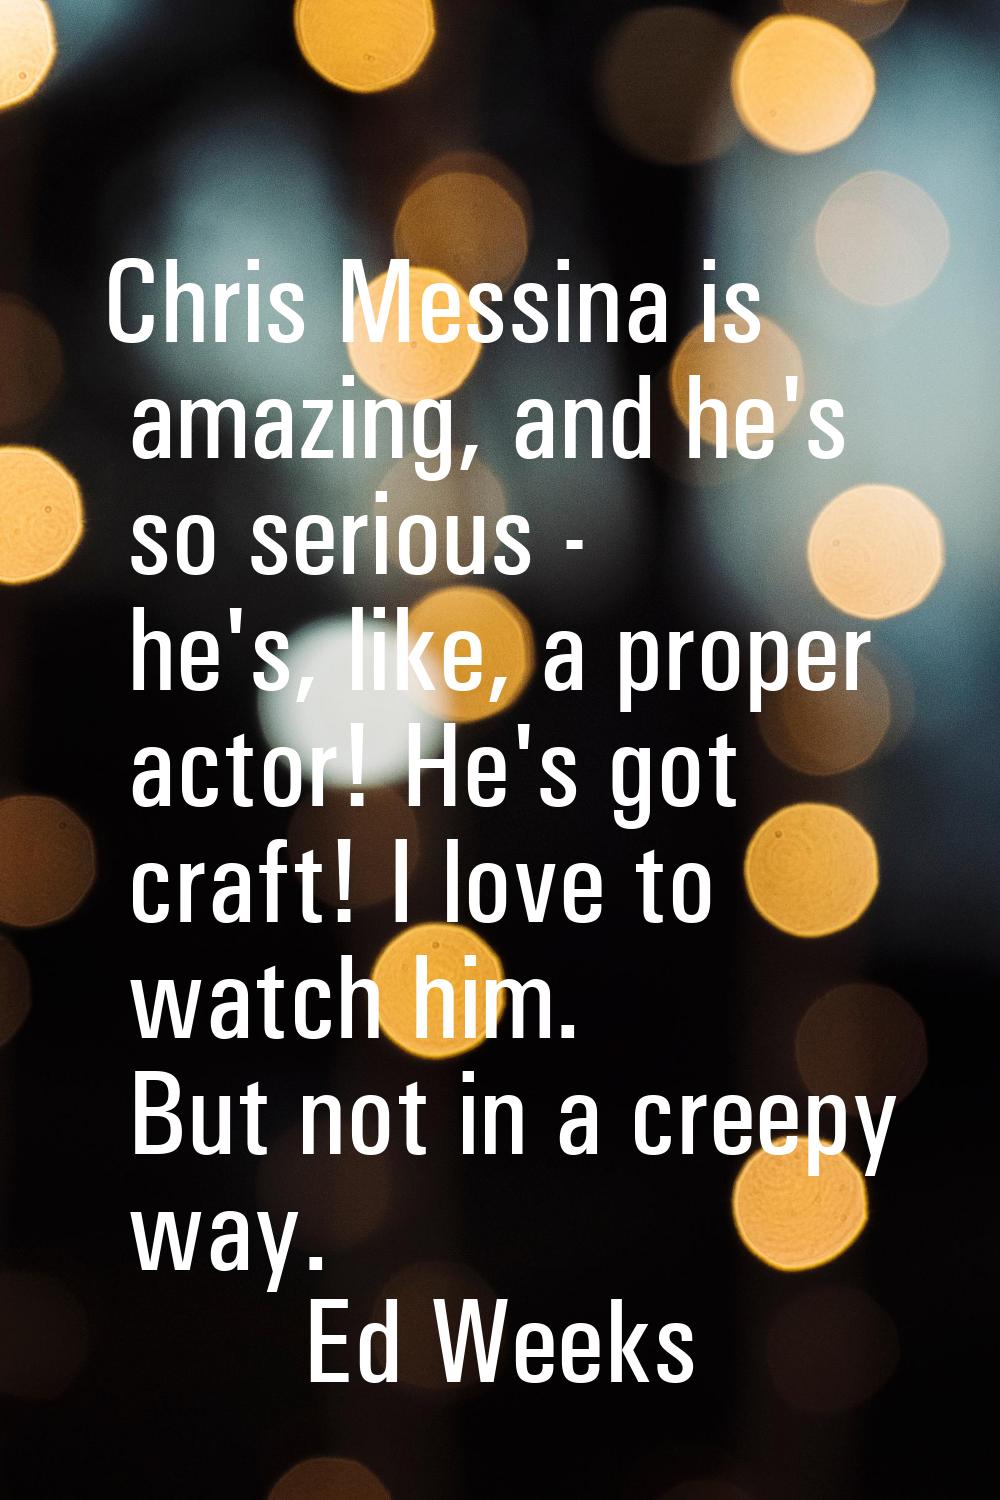 Chris Messina is amazing, and he's so serious - he's, like, a proper actor! He's got craft! I love 